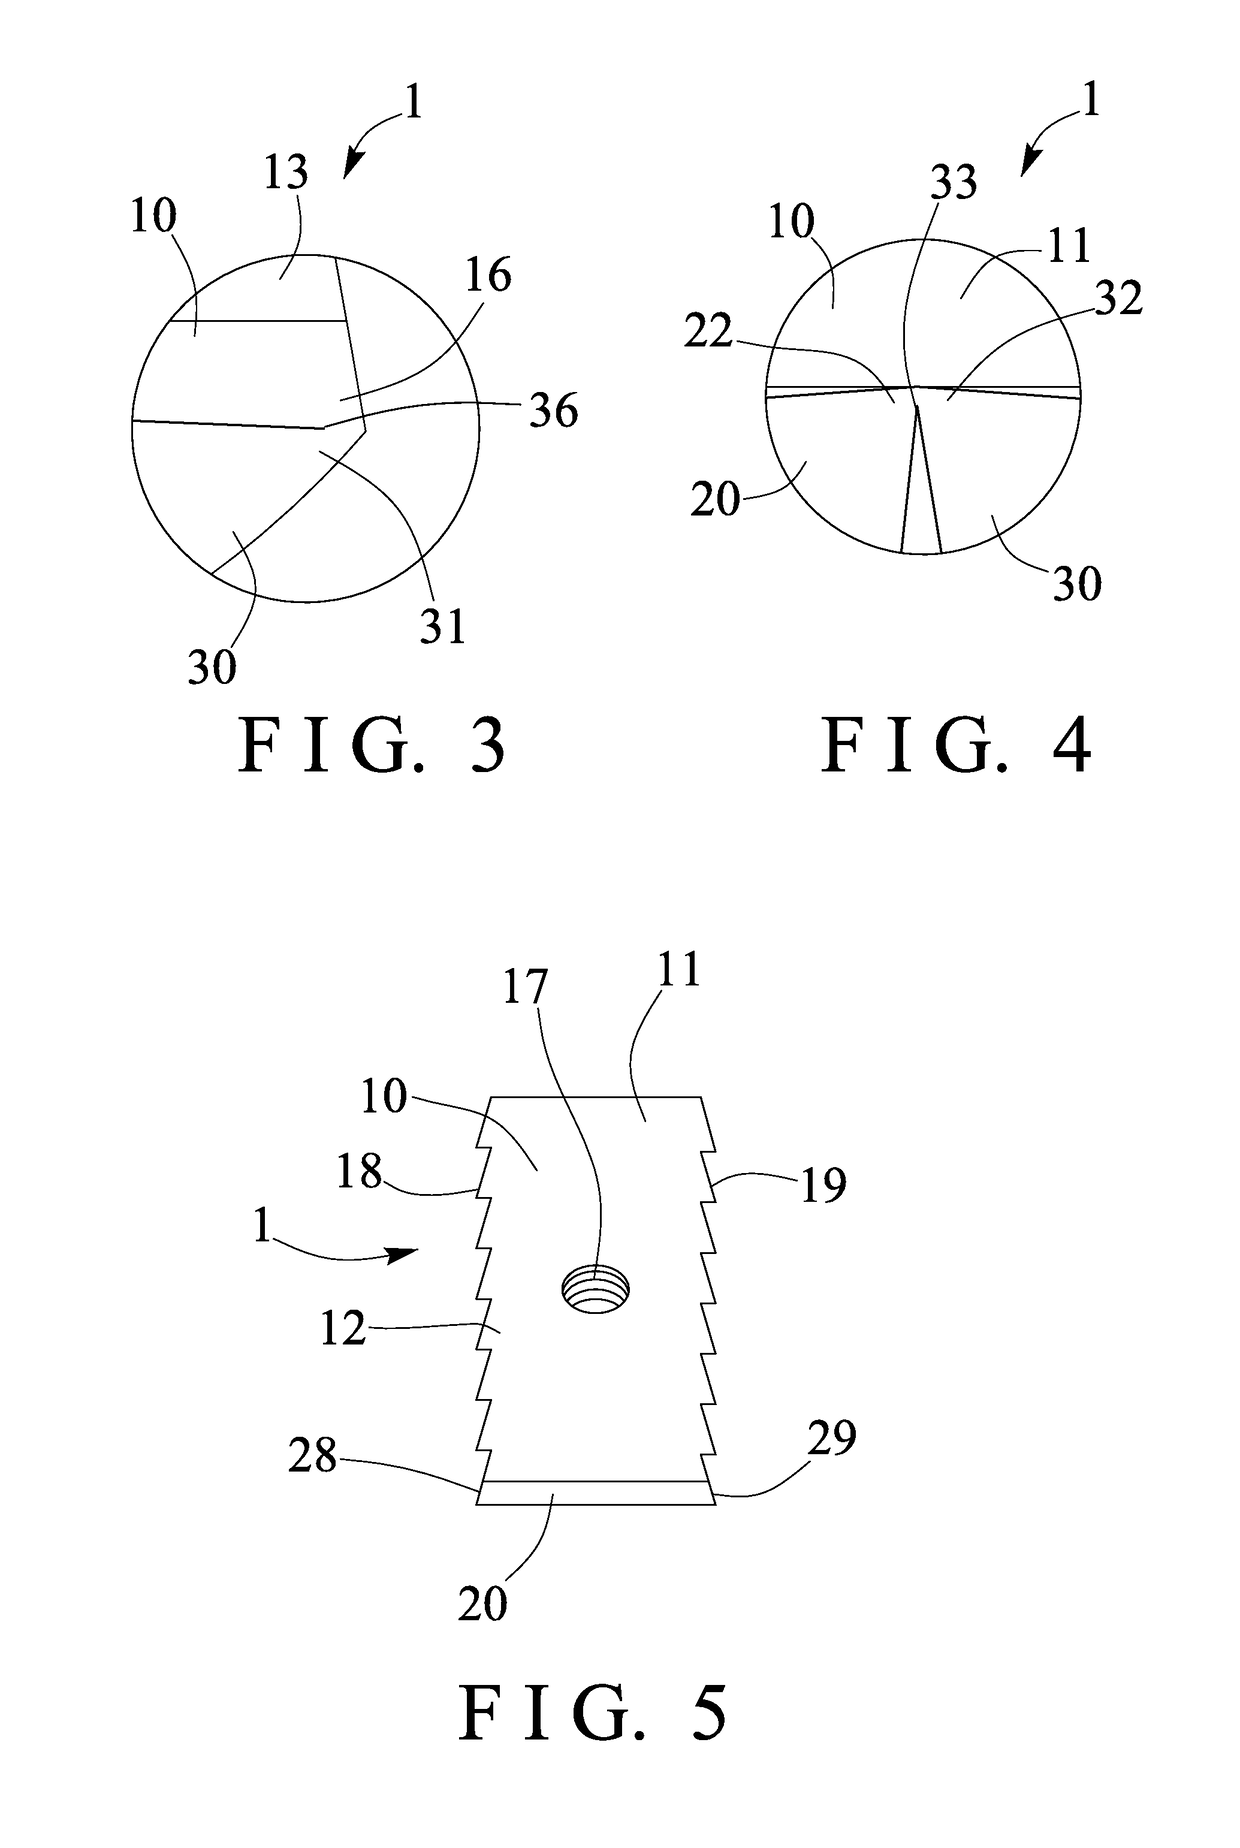 Expandable spinal interbody device